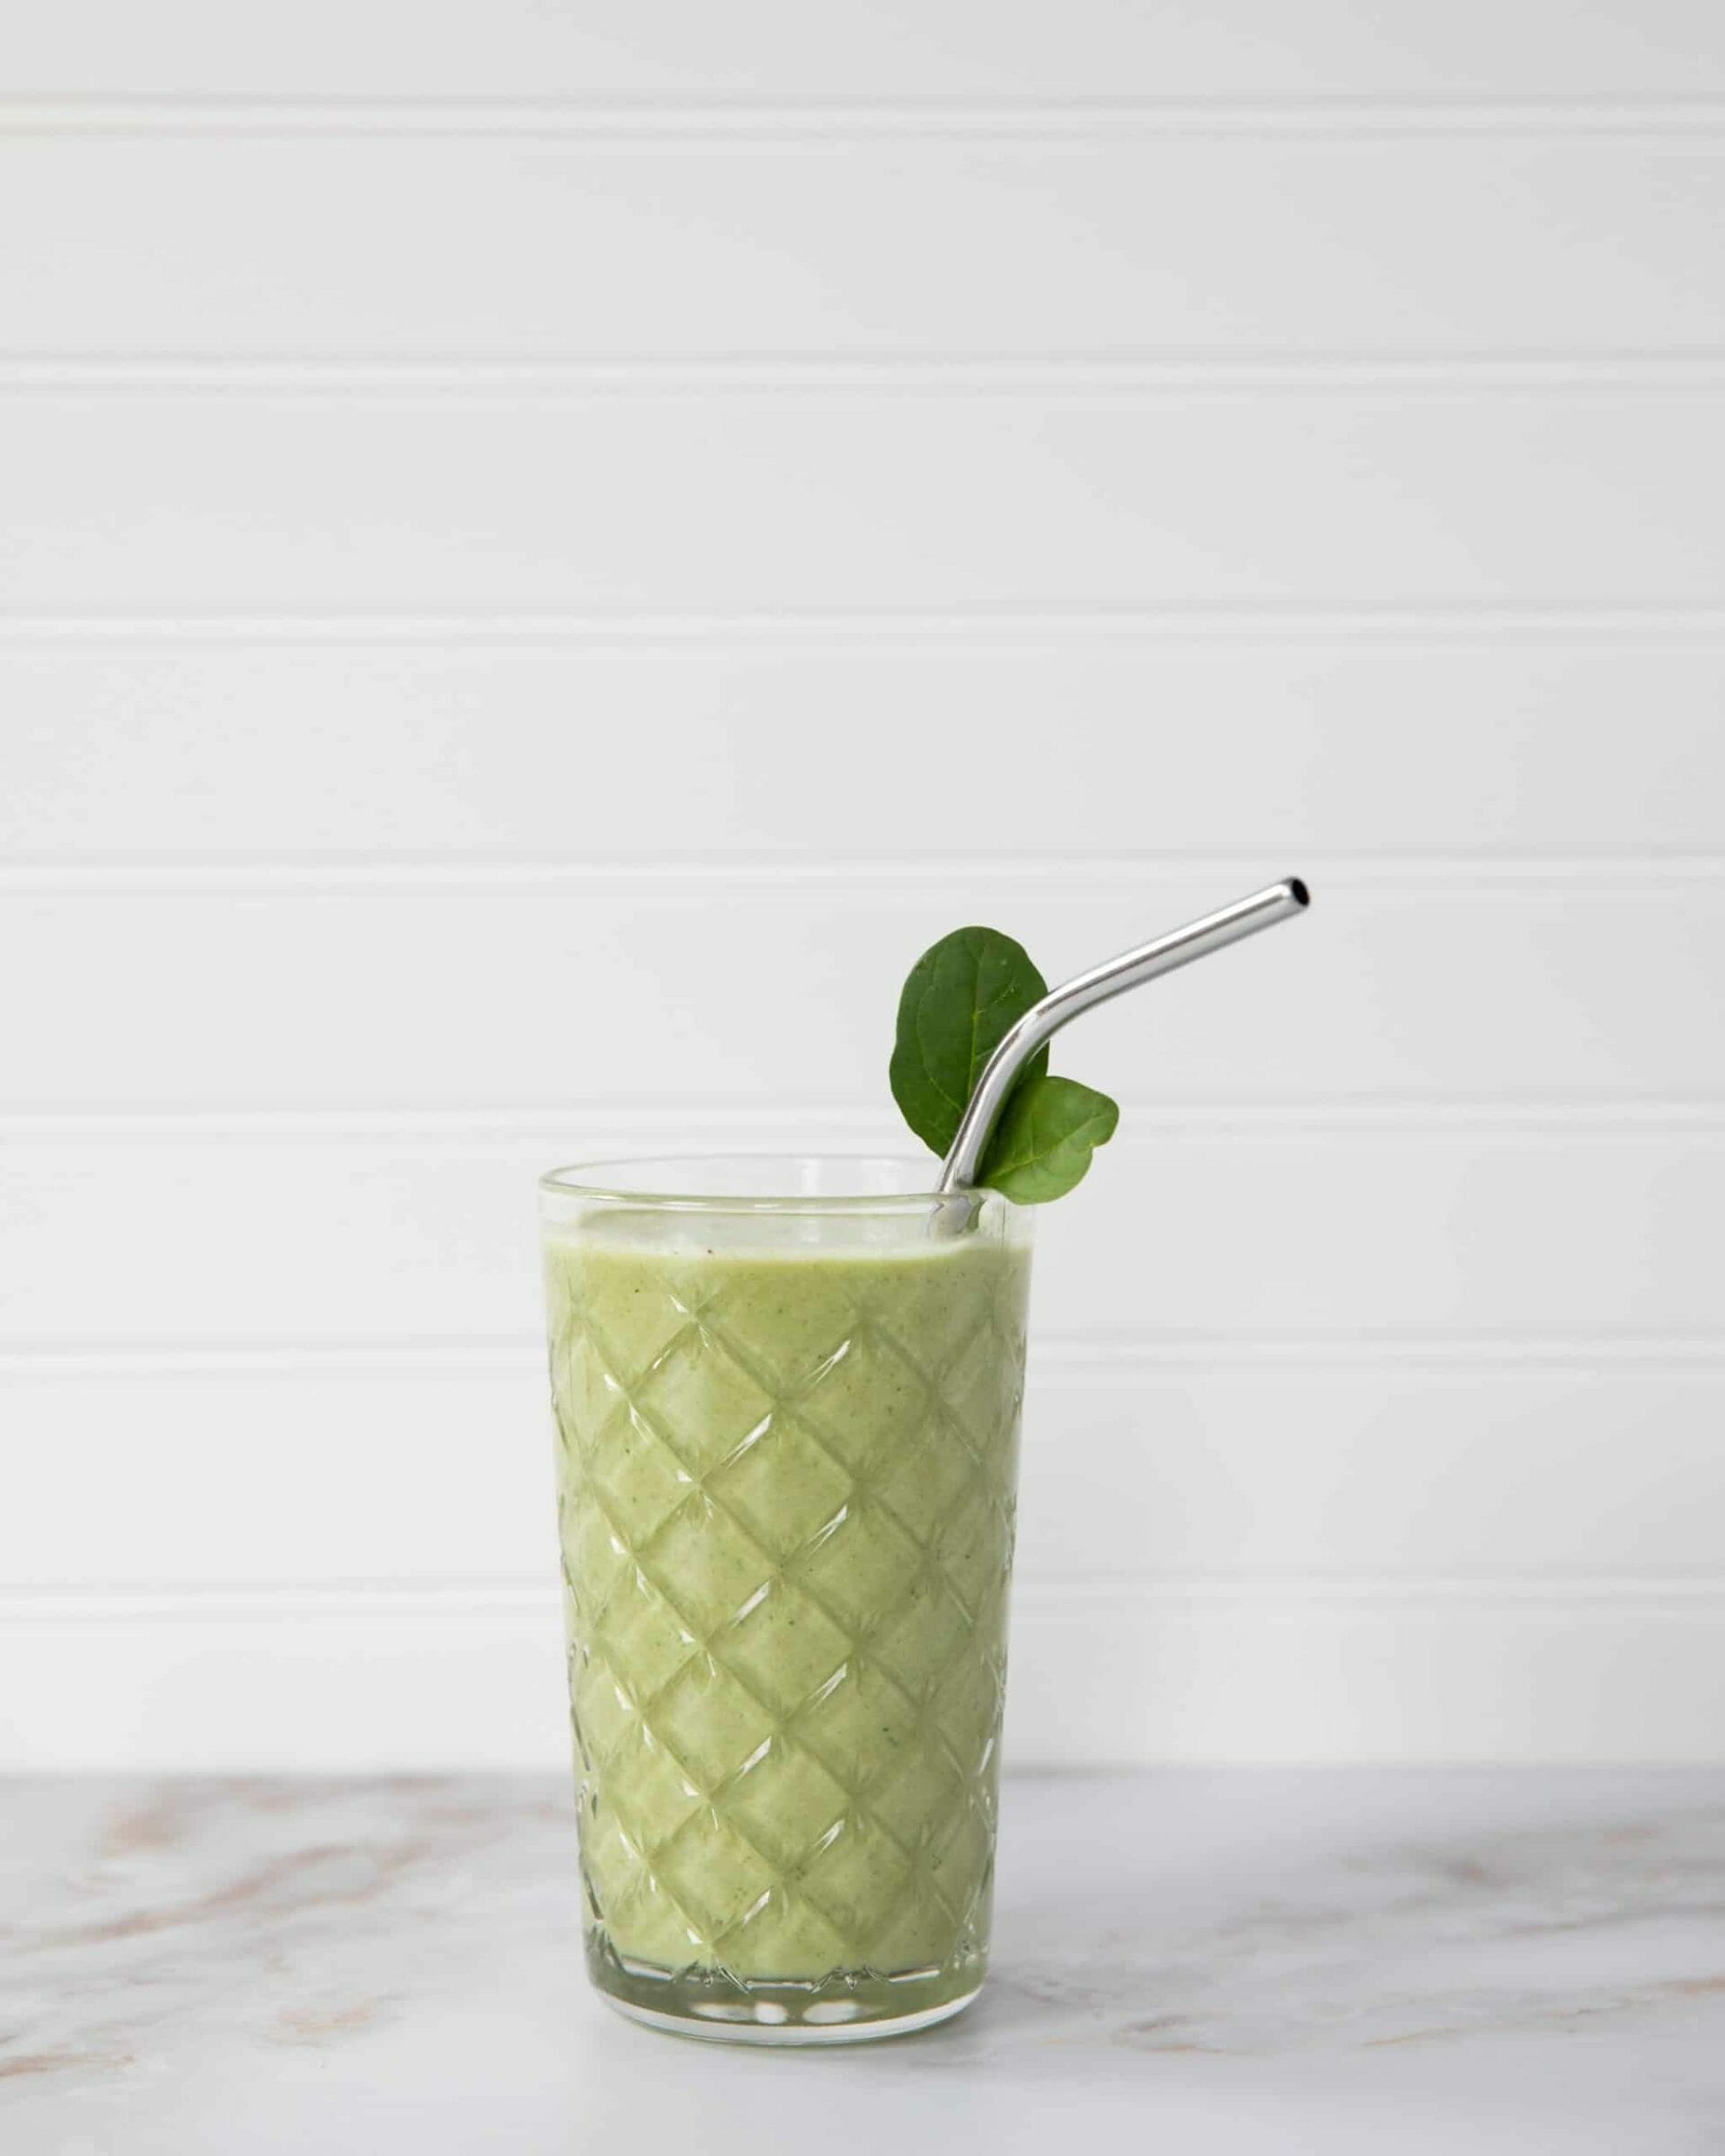 A green drink in a glass, with a metal straw and leaf garnish